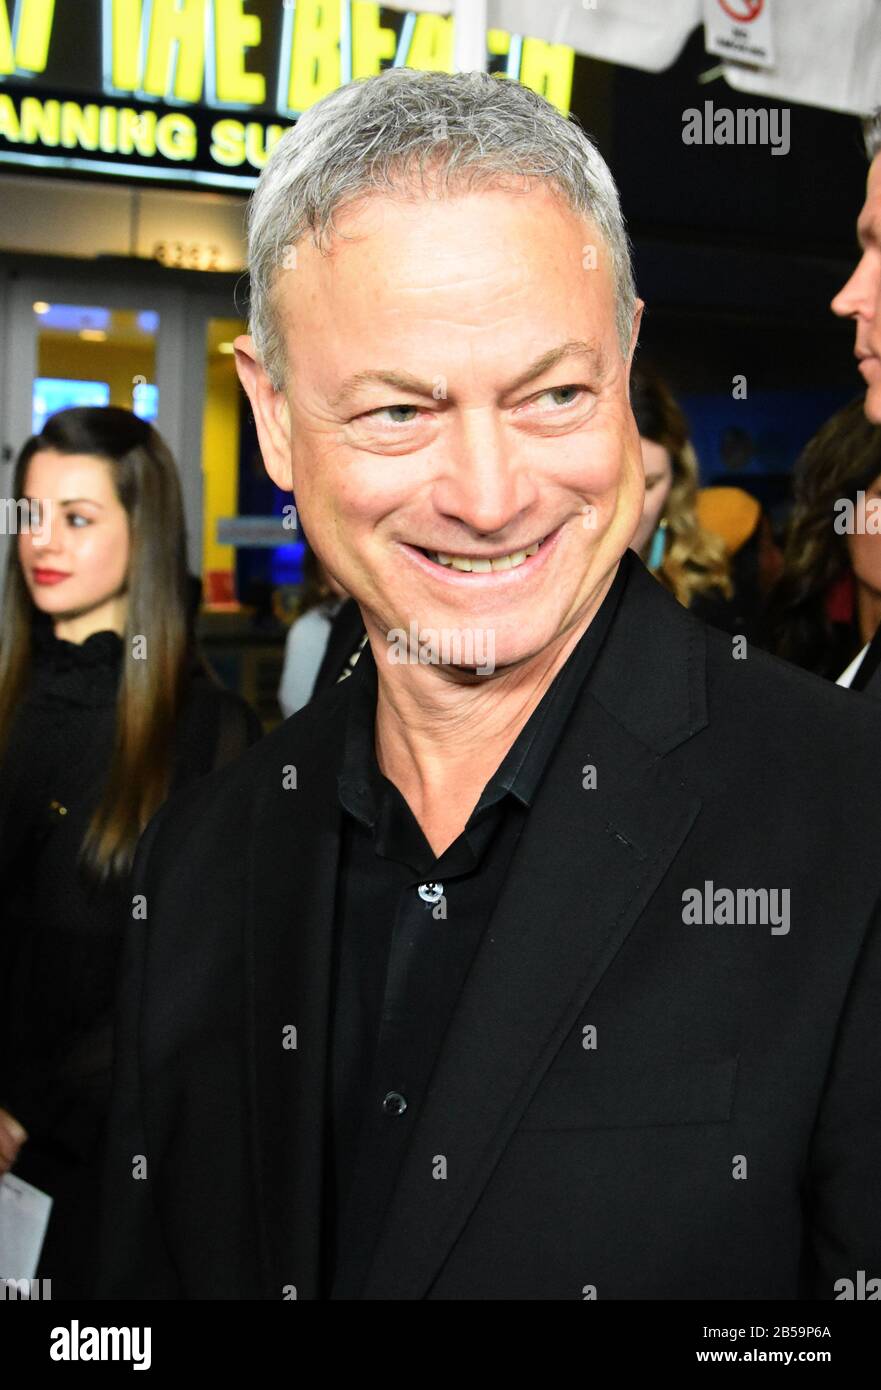 Los Angeles, California, USA 7th March 2020 Actor Gary Sinise attends Lionsgate's Los Angeles Special Screening of 'I Still Believe' on March 7, 2020 at Arclight Hollywood in Los Angeles, California, USA. Photo by Barry King/Alamy Live News Stock Photo